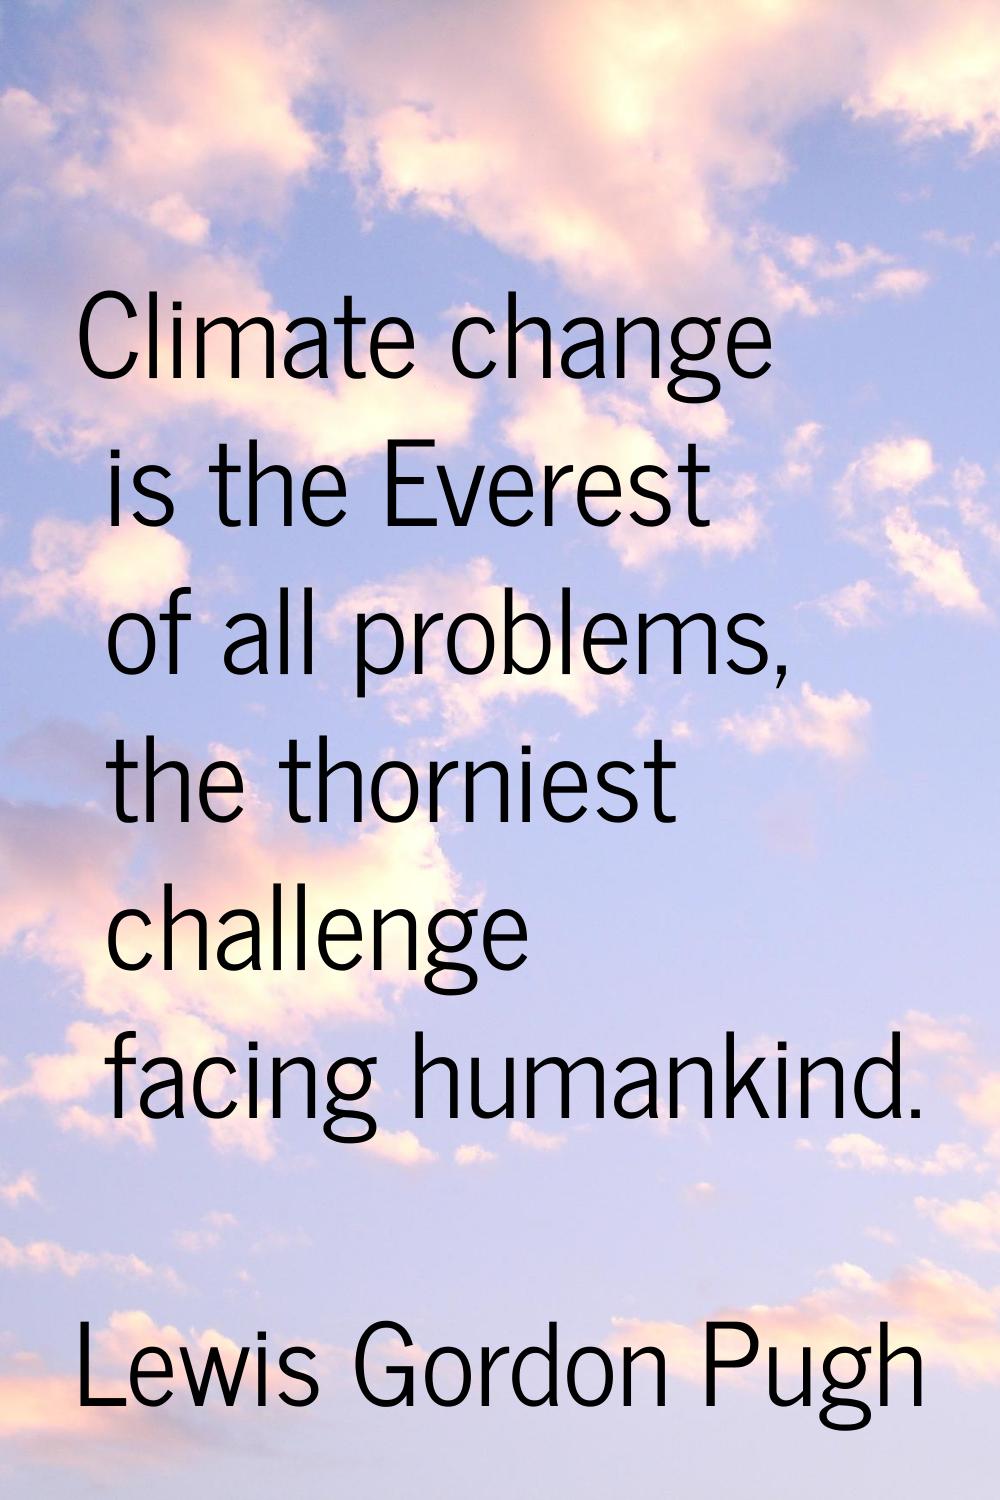 Climate change is the Everest of all problems, the thorniest challenge facing humankind.